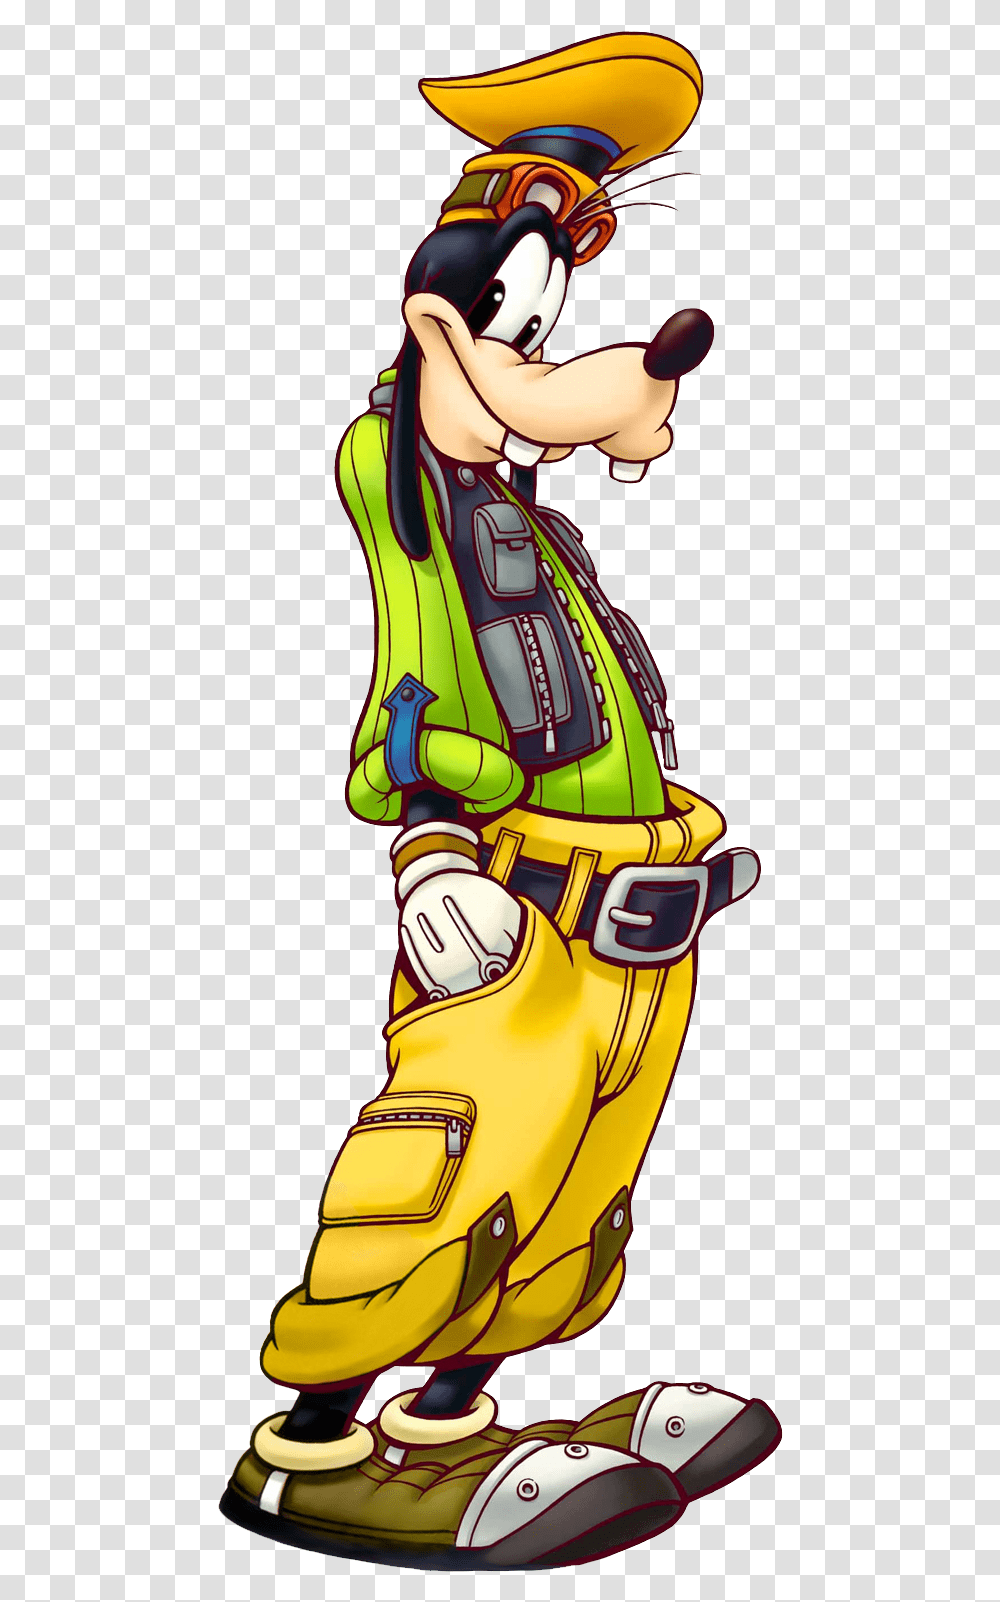 Kingdom Hearts Heartspng Images Goofy Kingdom Hearts Donald, Person, Human, Hand, Photography Transparent Png